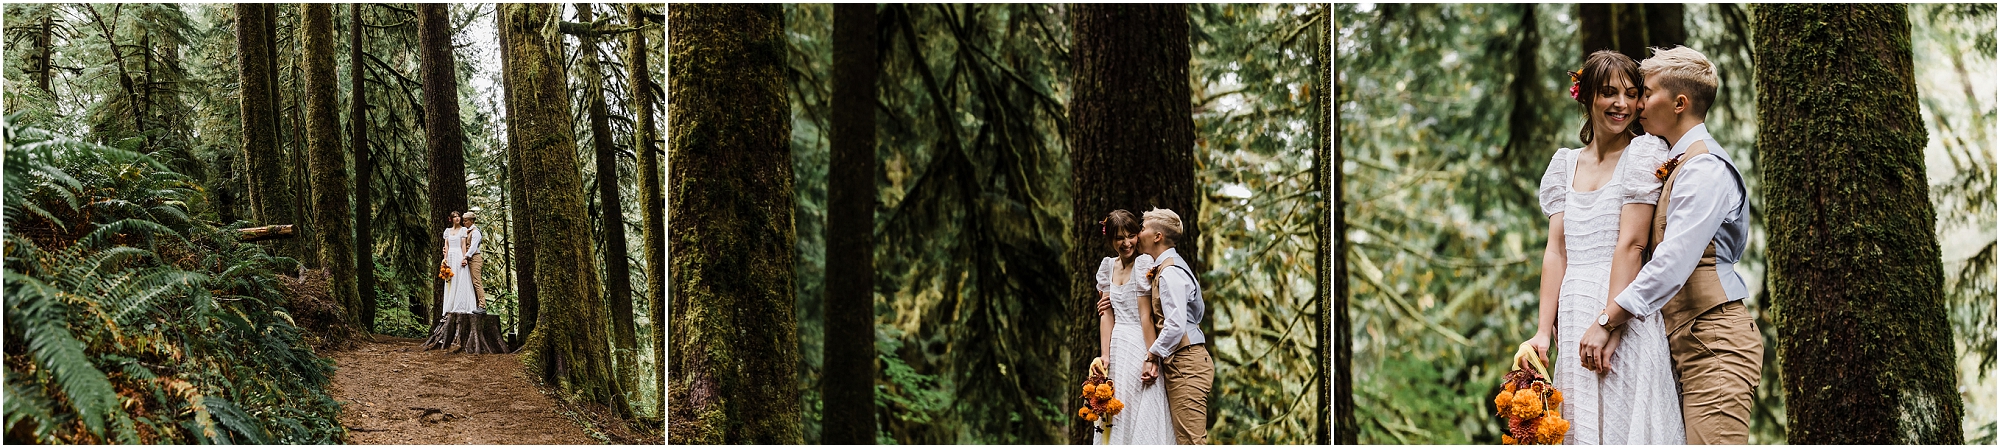 A large cut stump is the perfect perch for a couple to stand on in their wedding clothes along the trail to Drift Creek Falls where they will elope in a private ceremony just for them. | Erica Swantek Photography